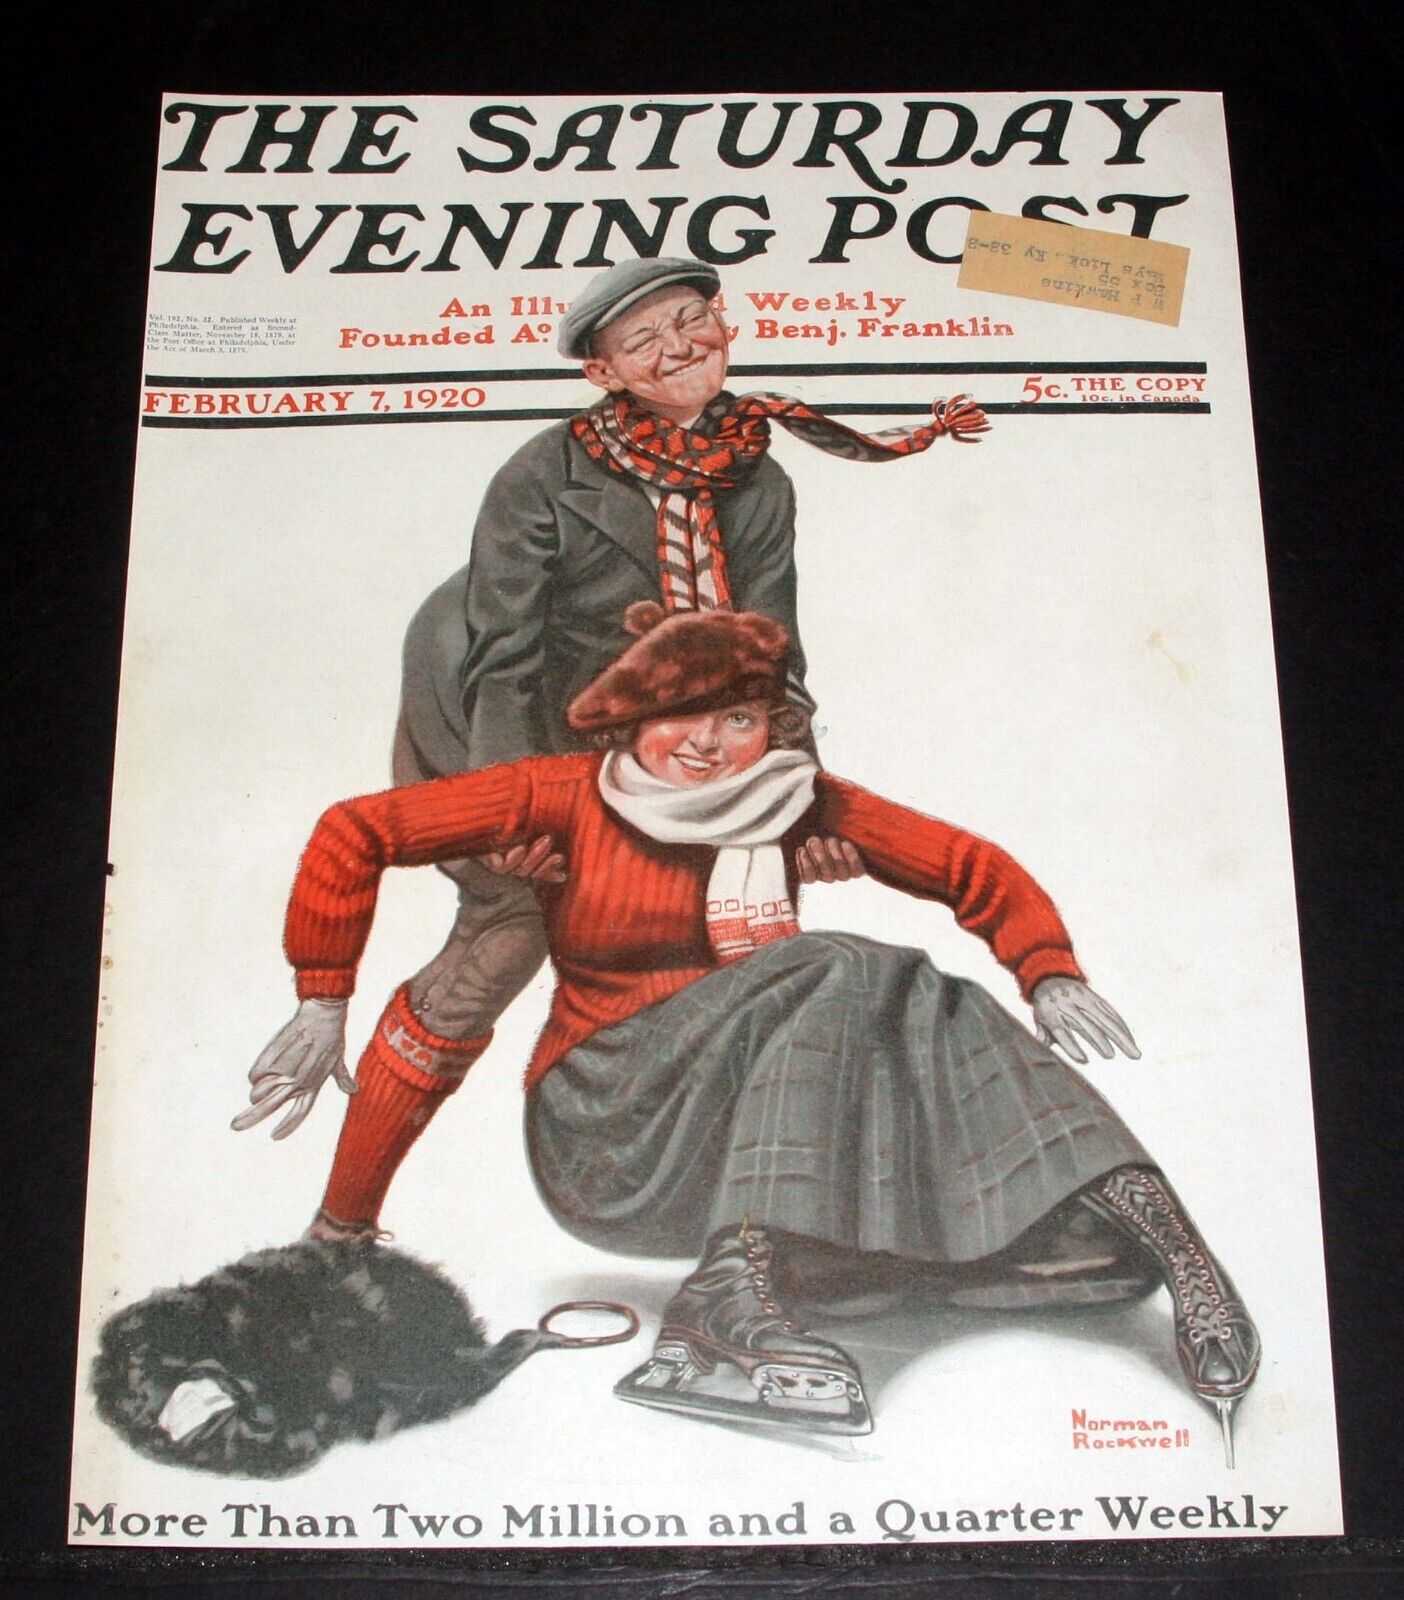 1920 FEB 7, SATURDAY EVENING POST MAGAZINE COVER (ONLY) NORMAN ROCKWELL ART